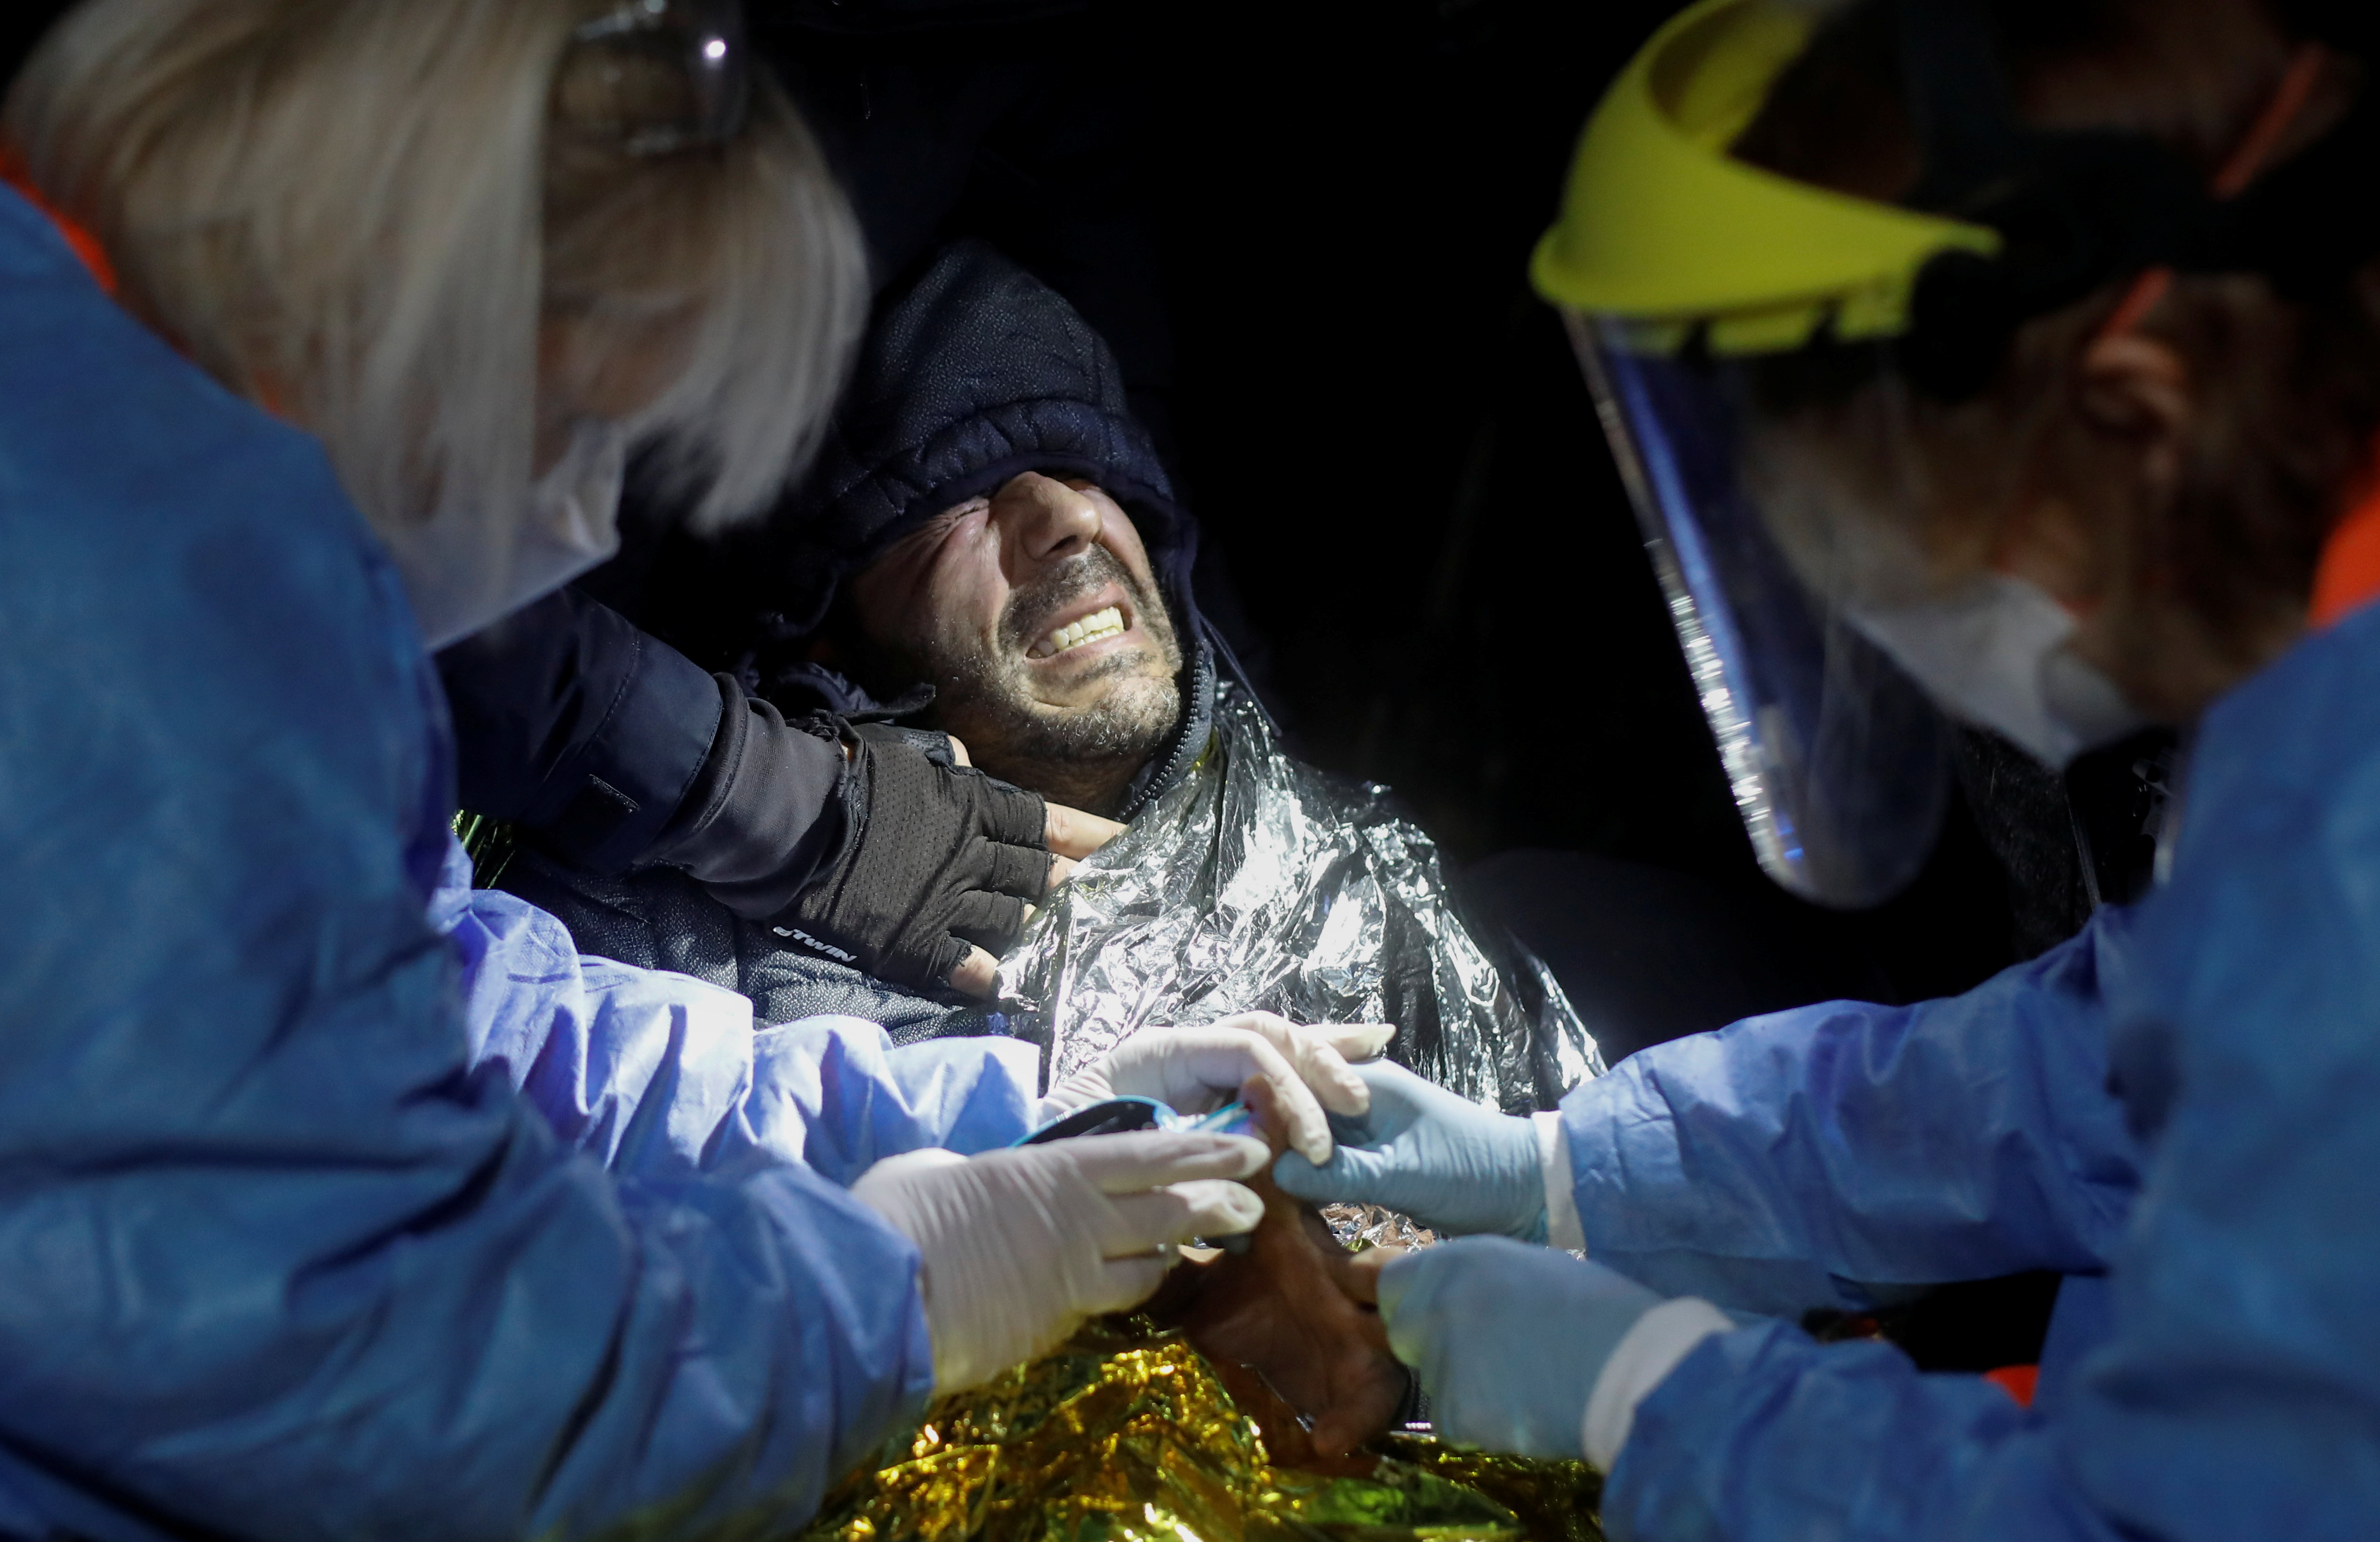 Kader, 39, a Syrian migrant from Homs, is rescued by medical workers during the migrant crisis at the Belarusian-Polish border, near Topczykaly, Poland, November 14, 2021. REUTERS/Kacper Pempel